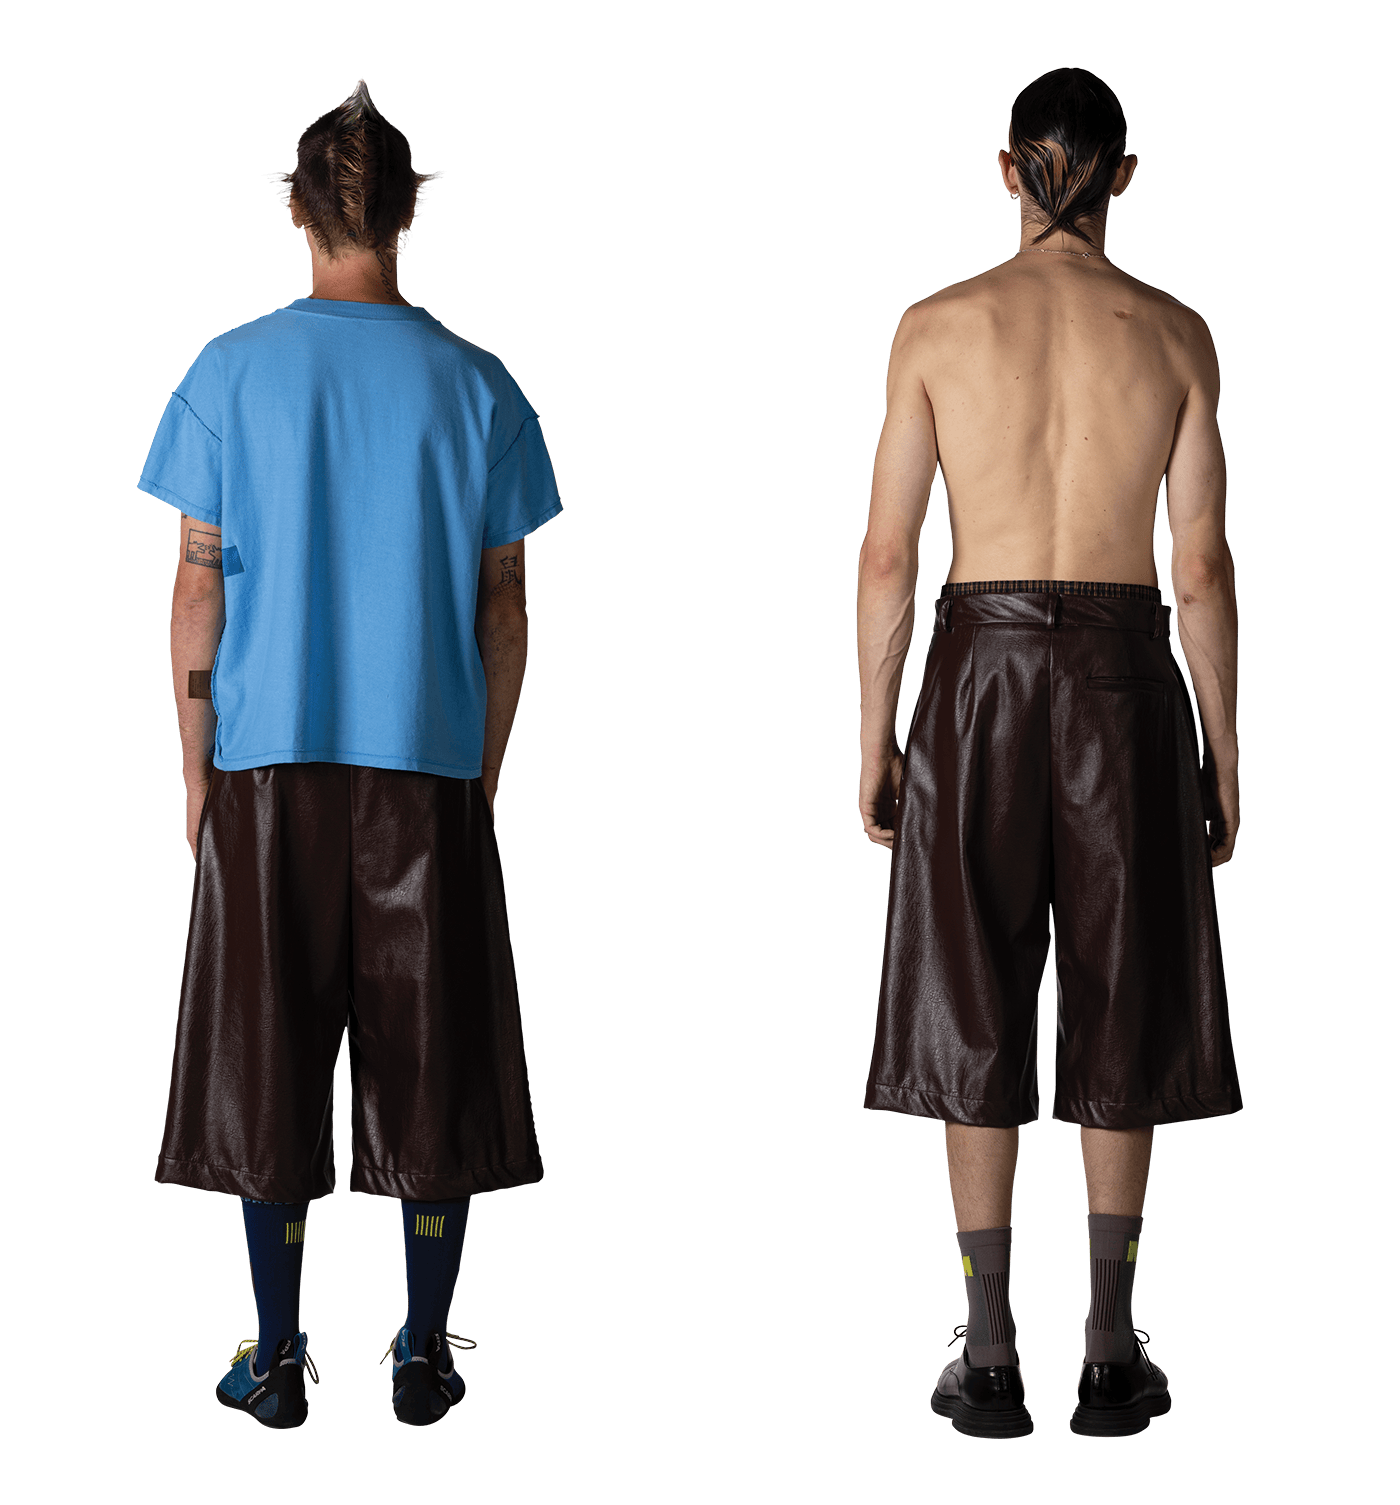 3/4 Rider Shorts "Faux leather" image 5